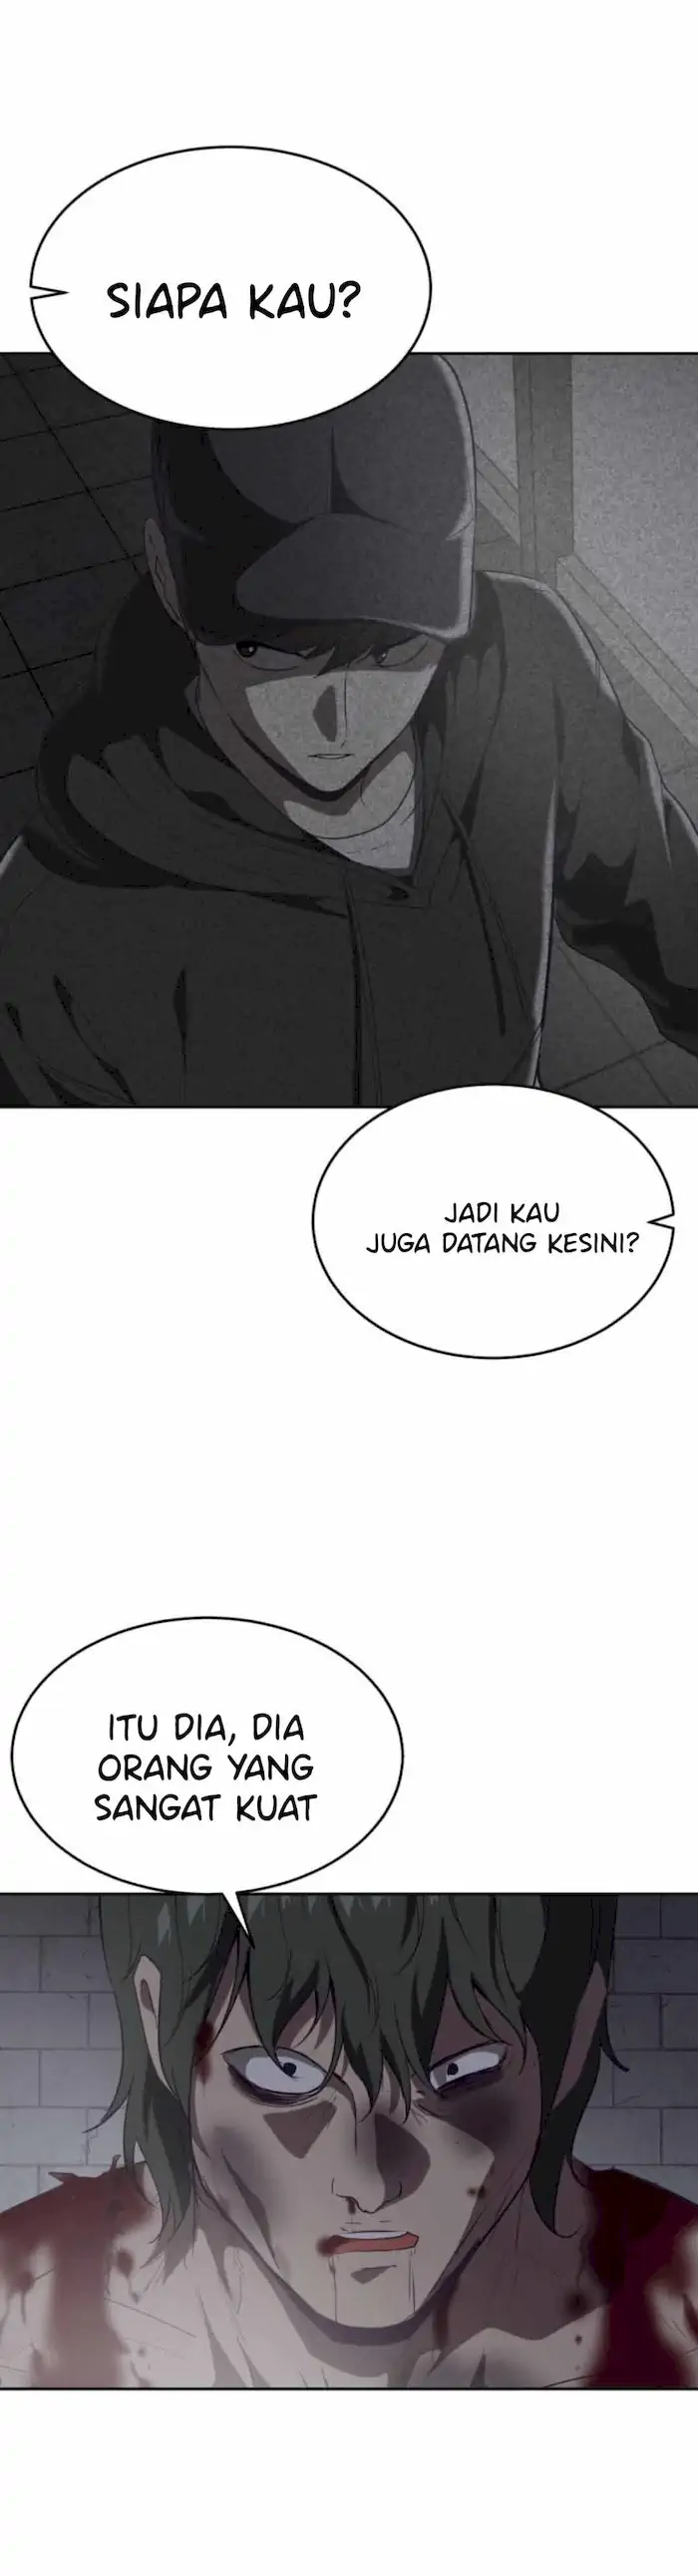 The Boy Of Death Chapter 78 - 157